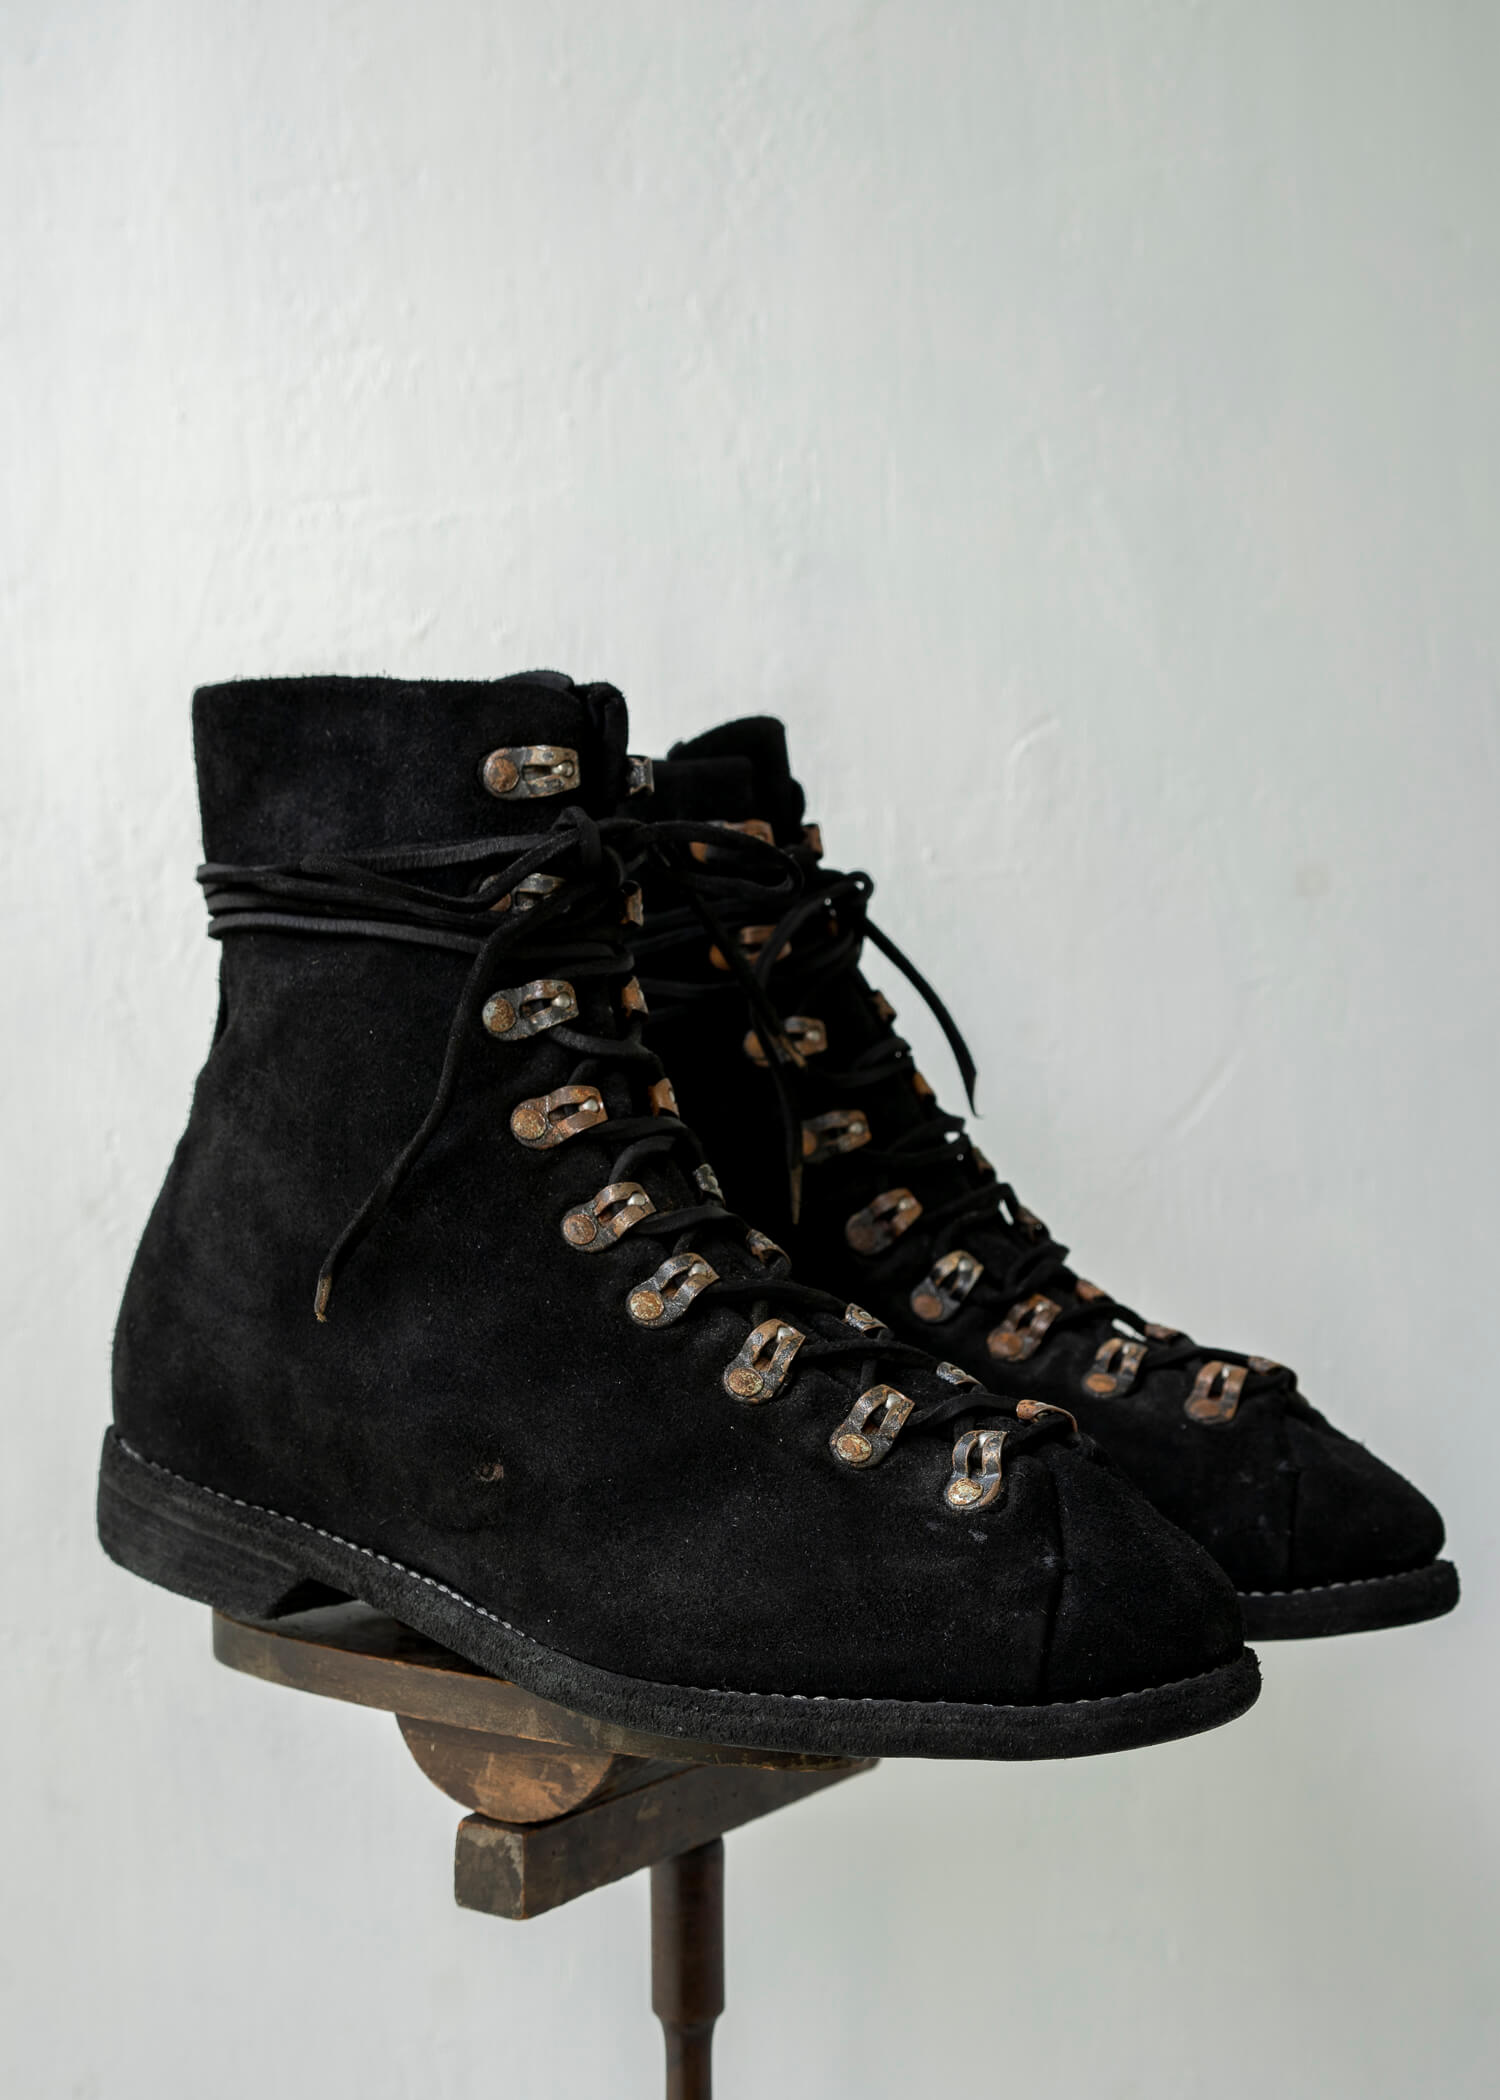 GUIDI / "205" CARF REVERS NEW HIKING / SOLE LEATHER / CARF FULL GRAIN / BLKT